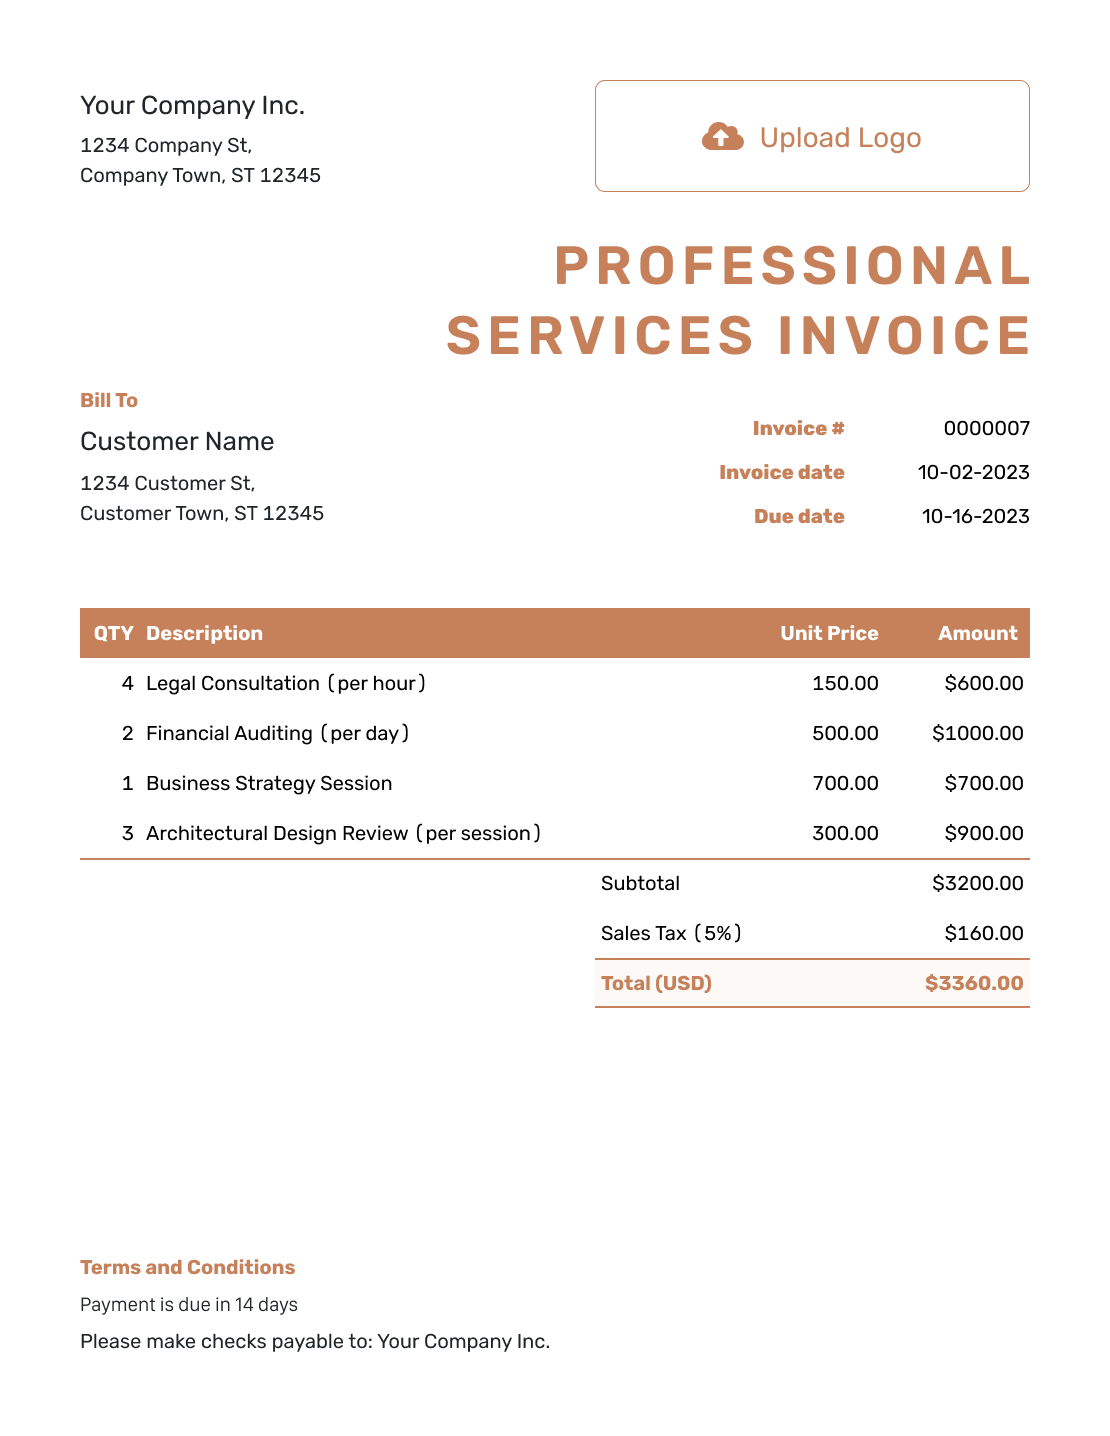 Standard Professional Services Invoice Template